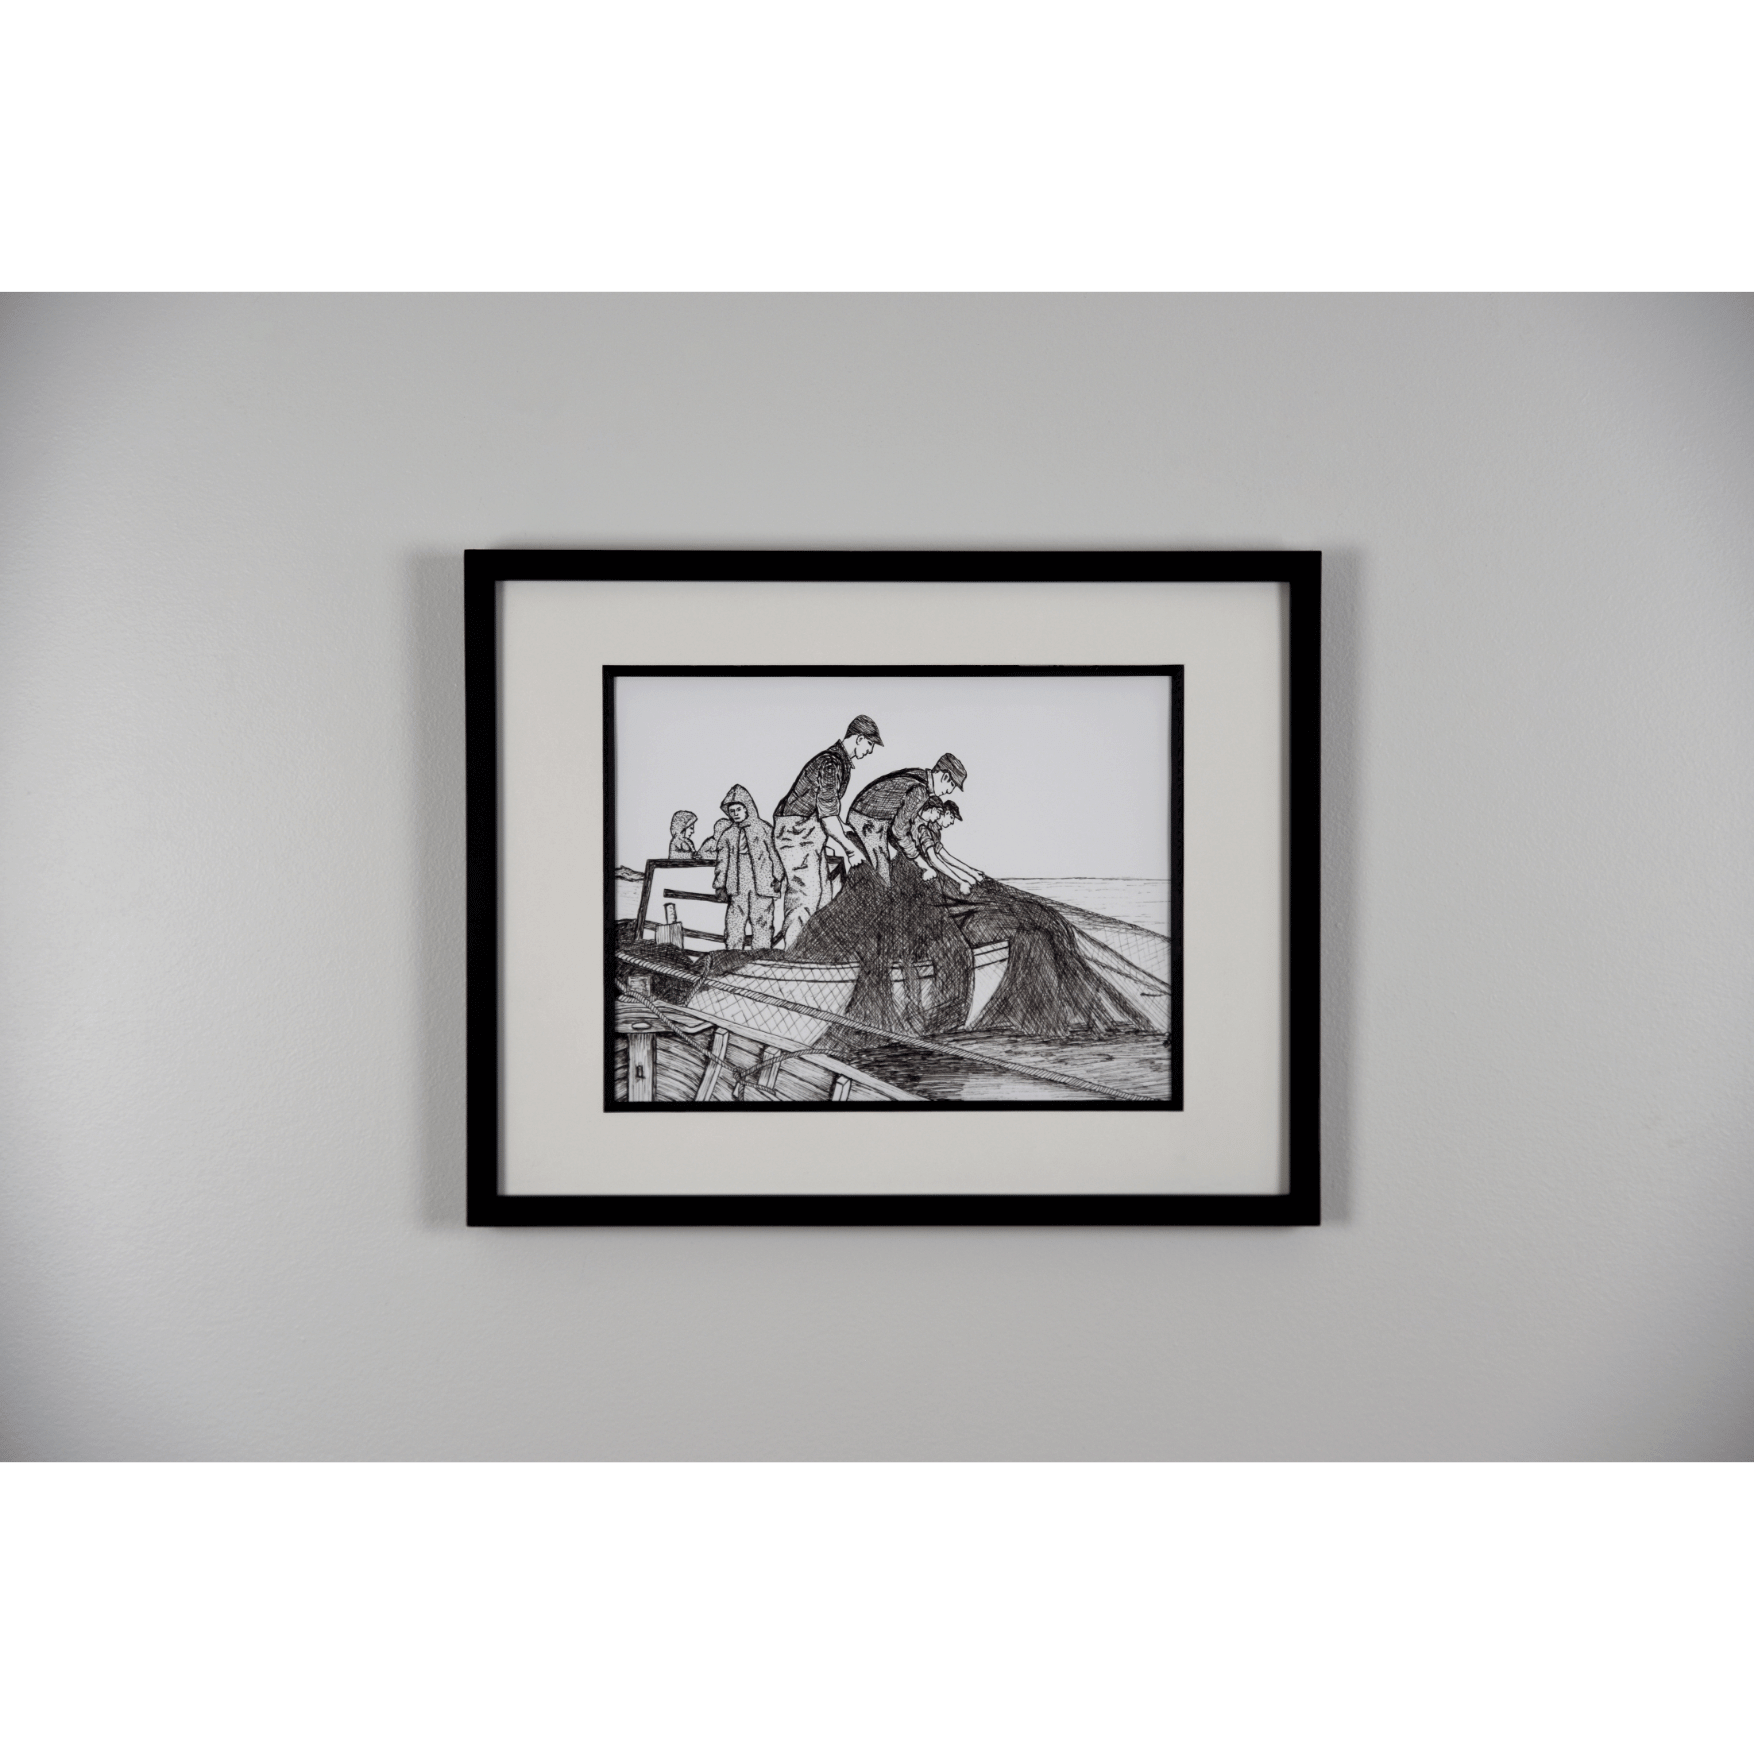 Add a touch of rustic charm with "The Haul" reproduction print. This pen and ink print features fishermen hauling their nets to the boat.